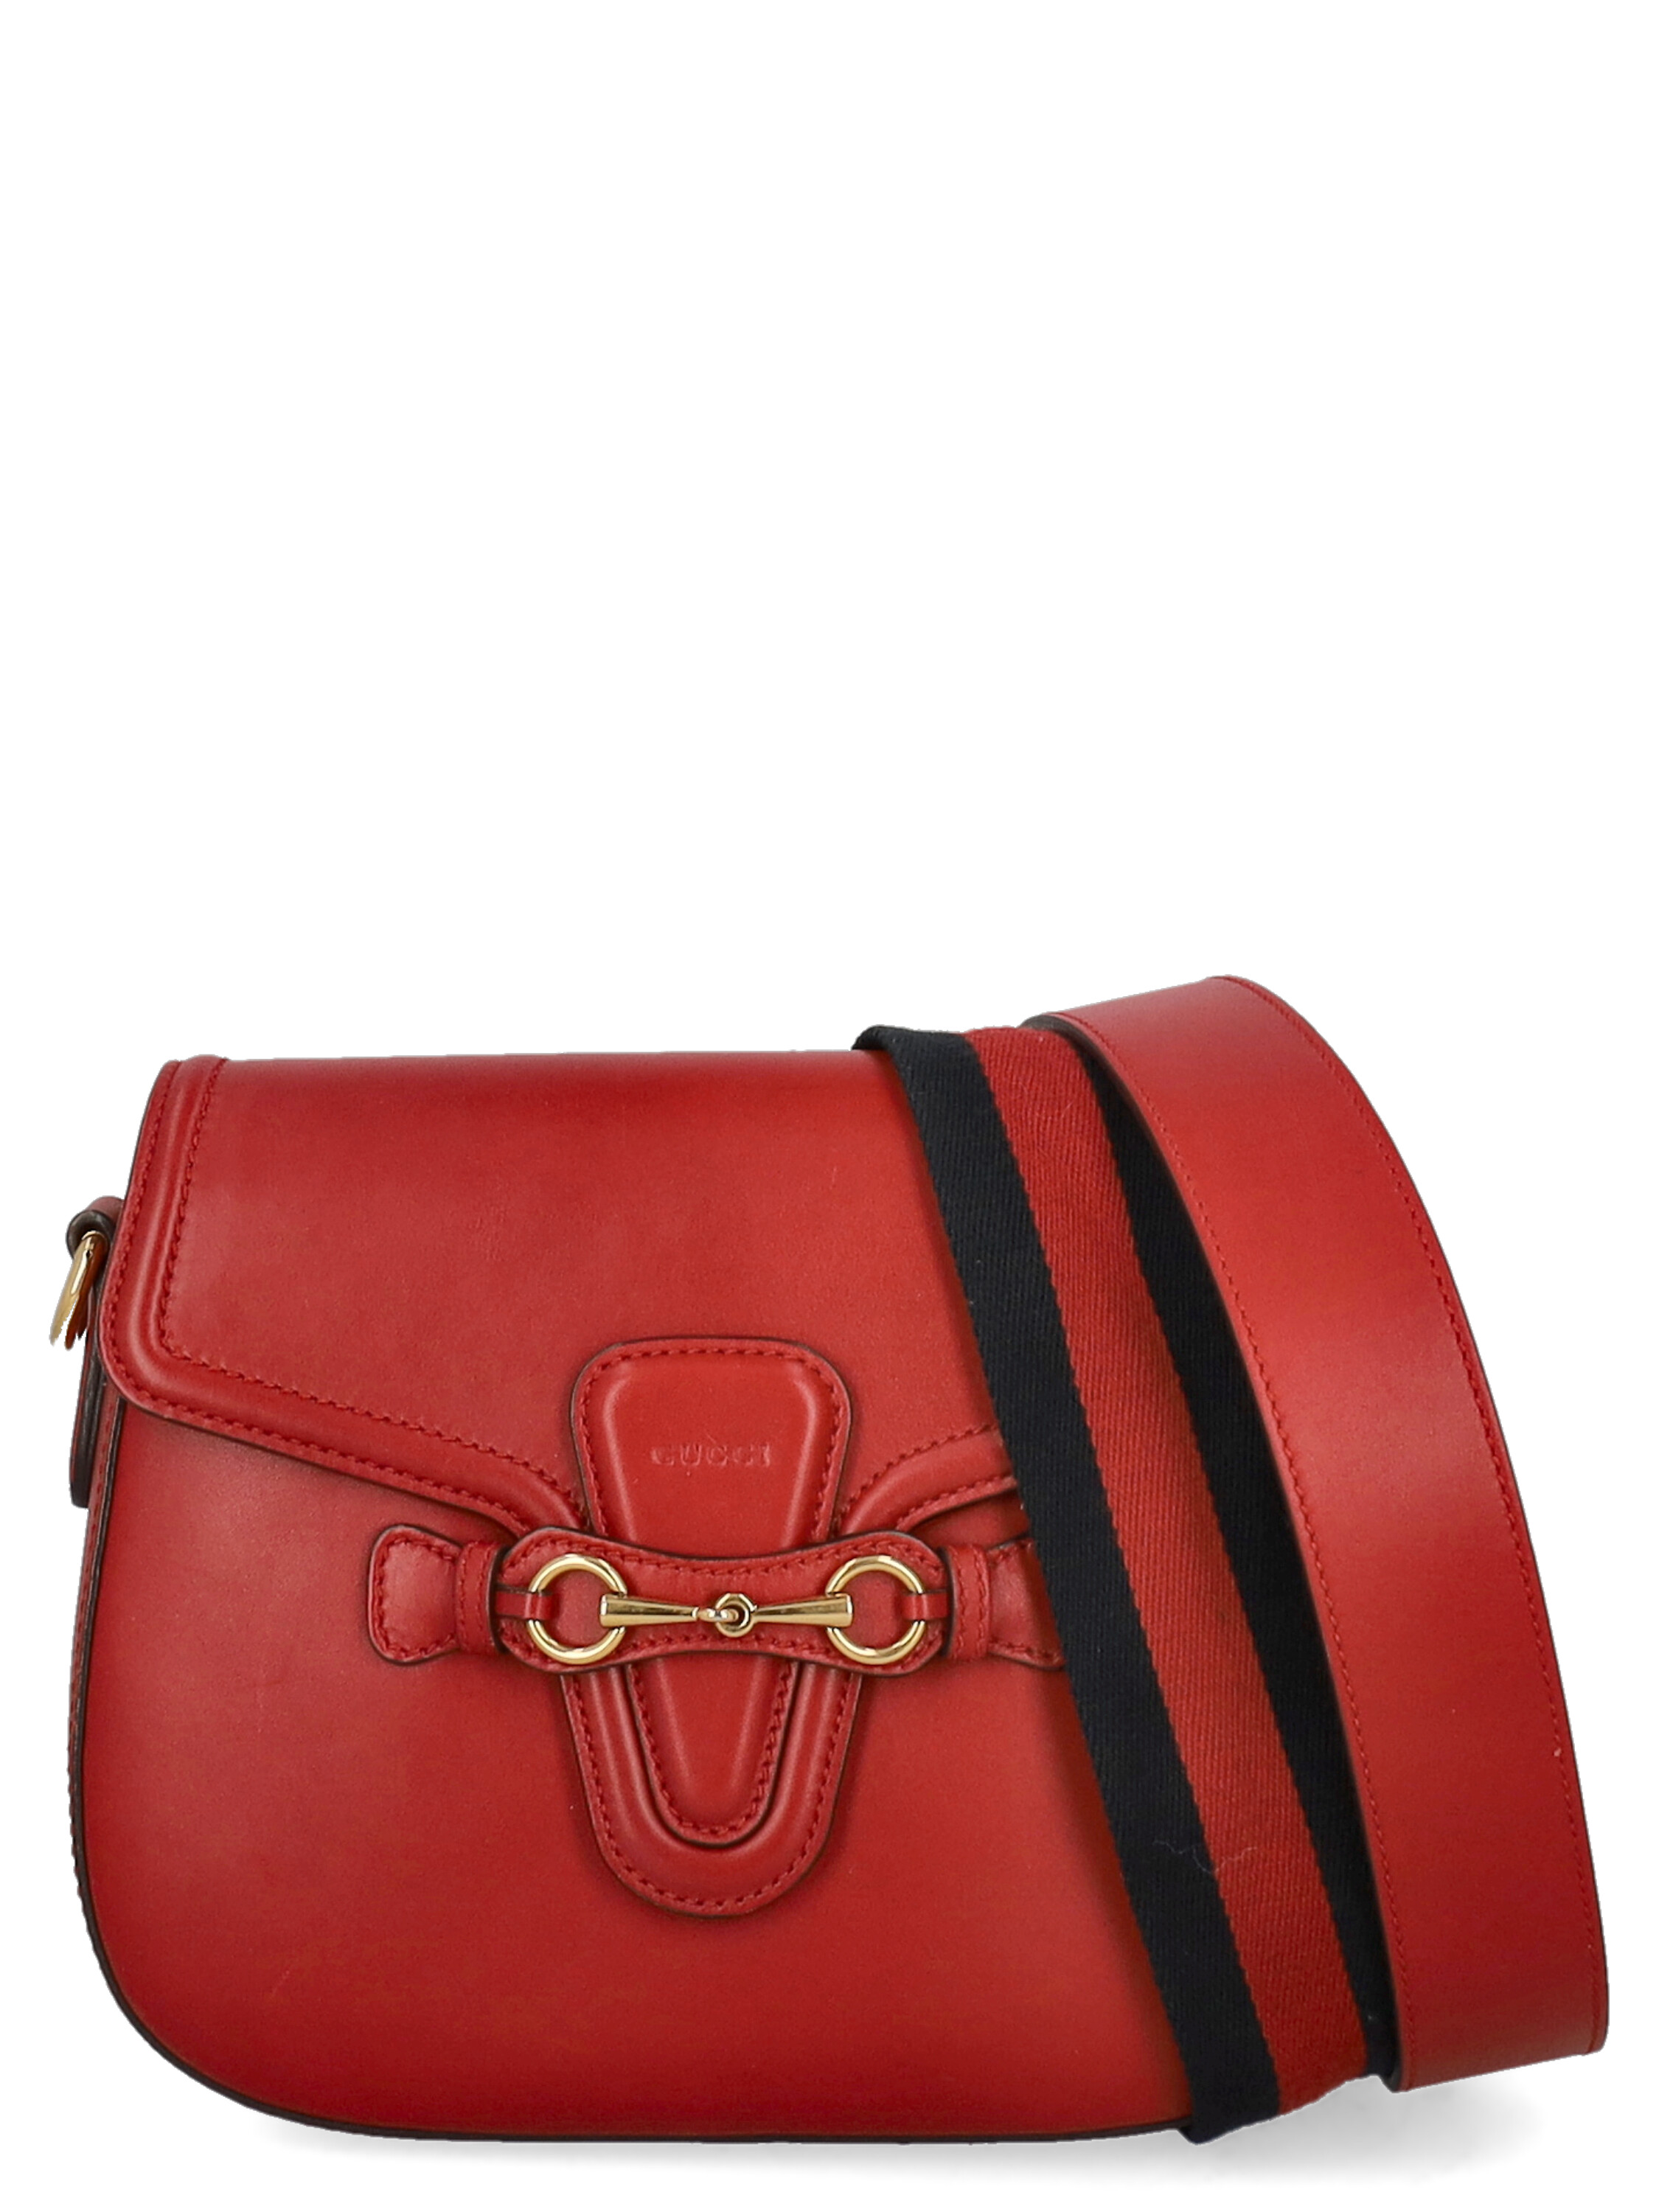 Pre-owned Gucci Women's Shoulder Bags -  - In Red Leather